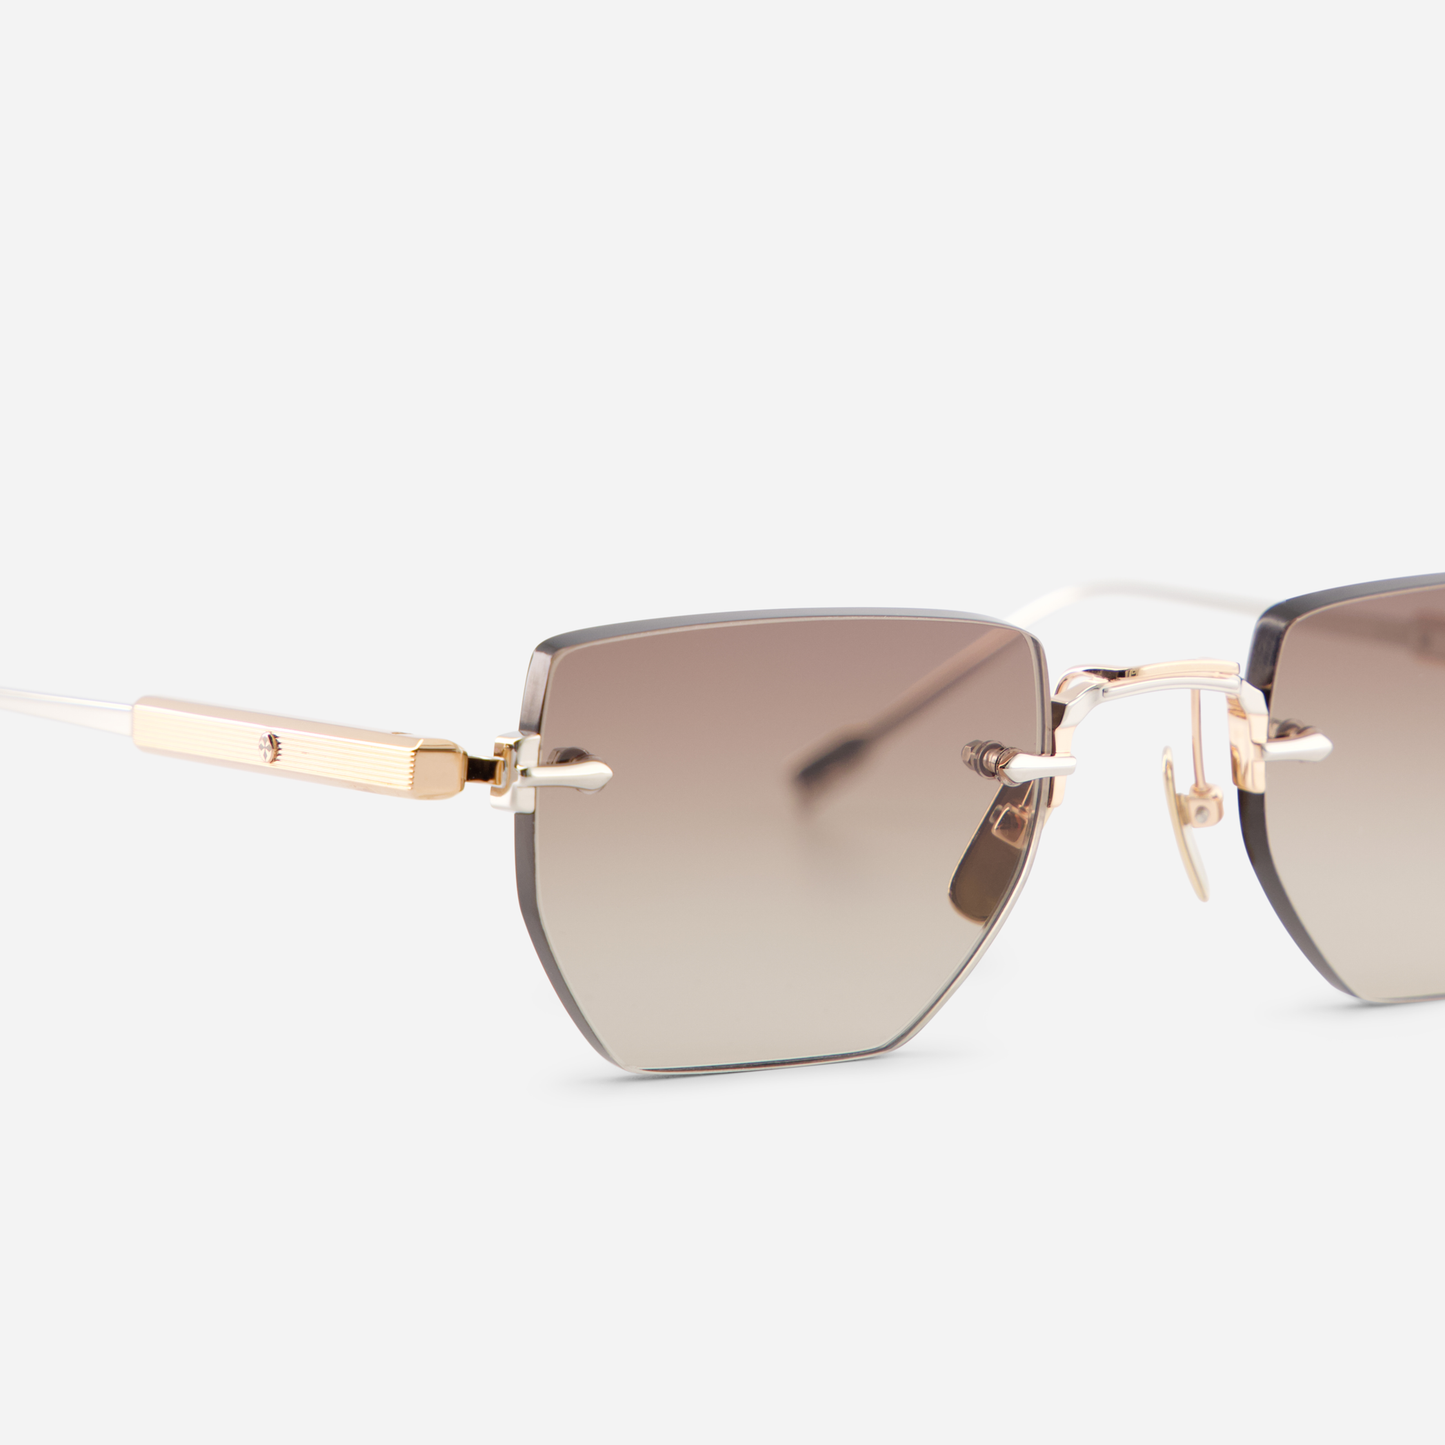 Sato Rimless Collection, featuring the Terebellum III S804 with a Titanium frame, rose gold & platinum accents, and stylish gradient brown lenses.